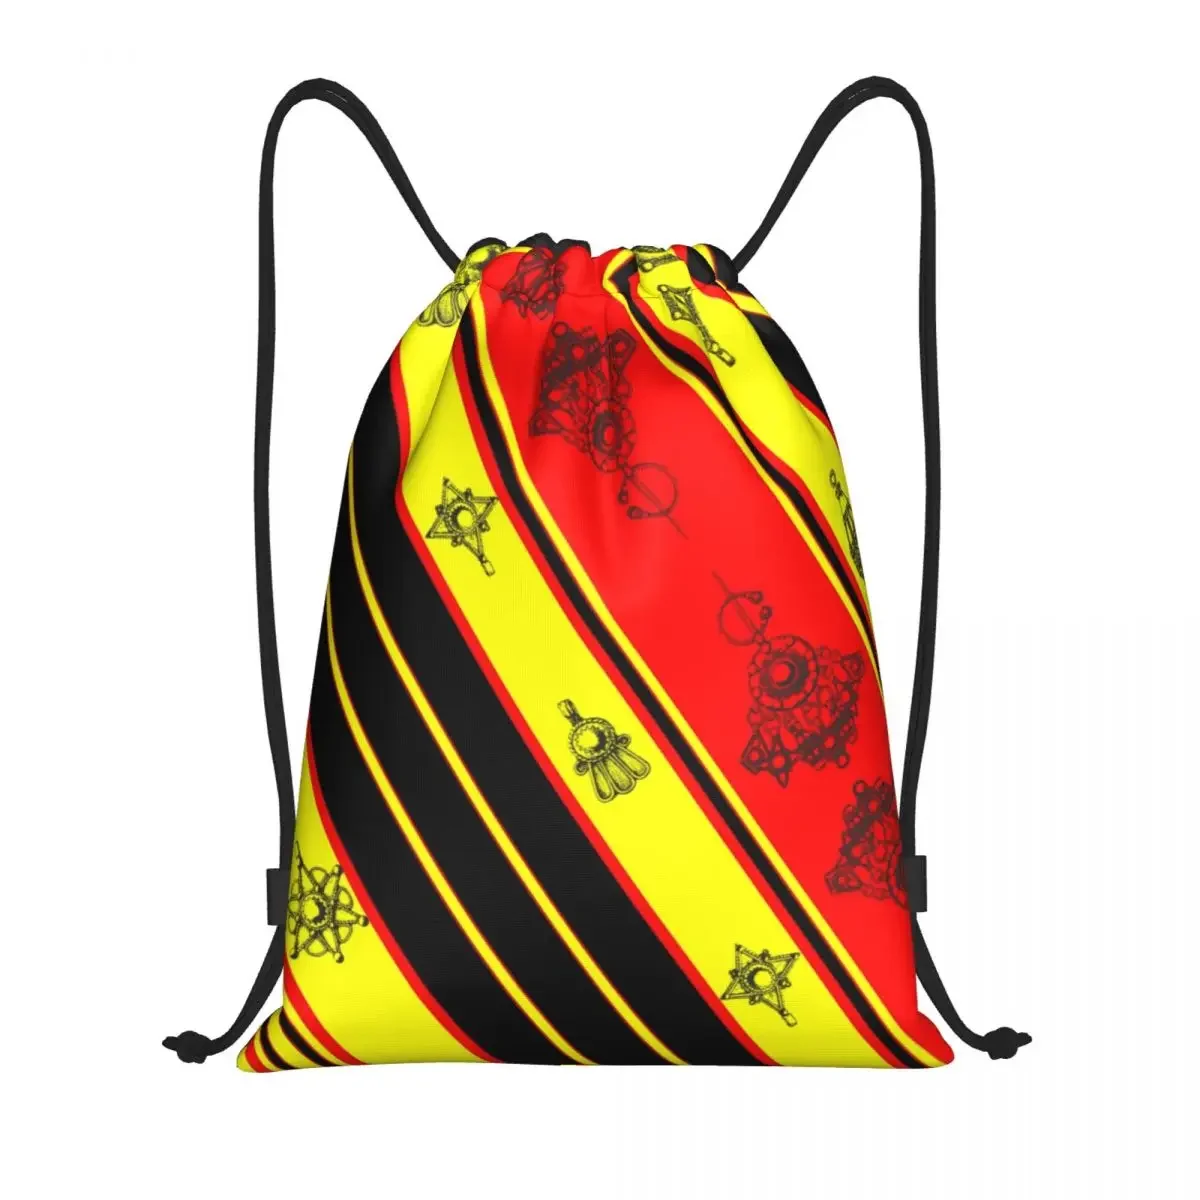 

Traditional Kabyle Jewelry Drawstring Backpack Bags Lightweight Amazigh Carpet Ethnic Gym Sports Sackpack Sacks for Traveling